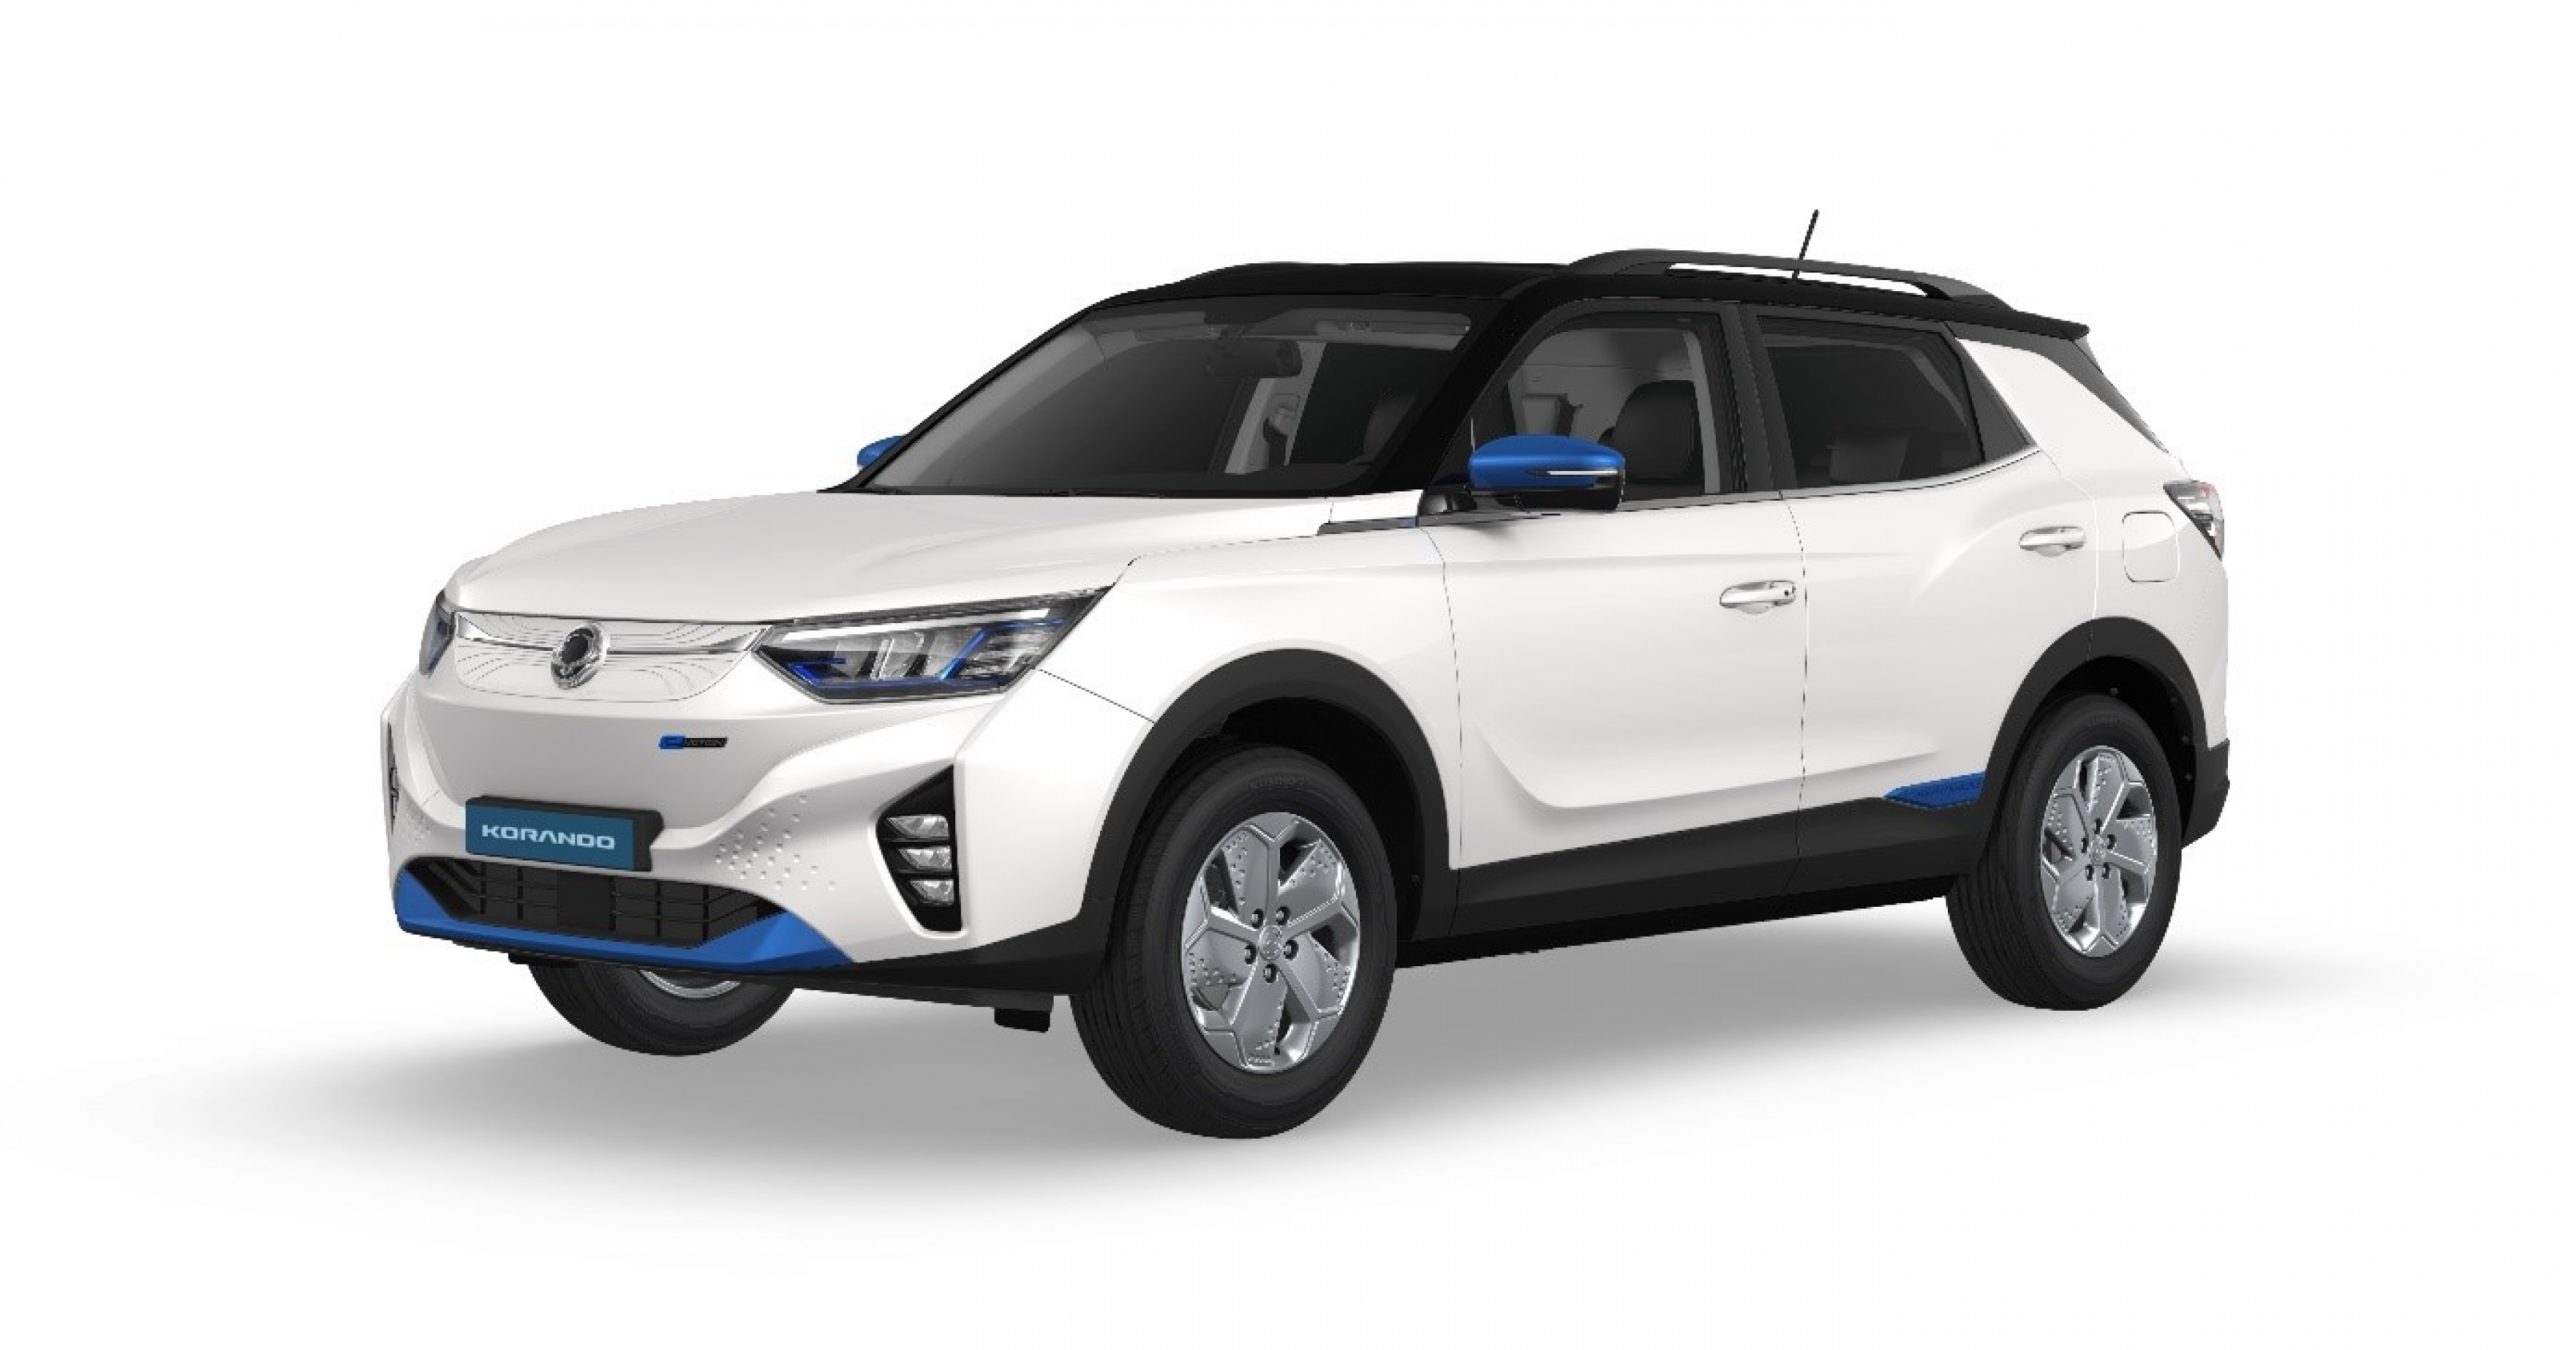 SsangYong’s first EV to be launched in autumn